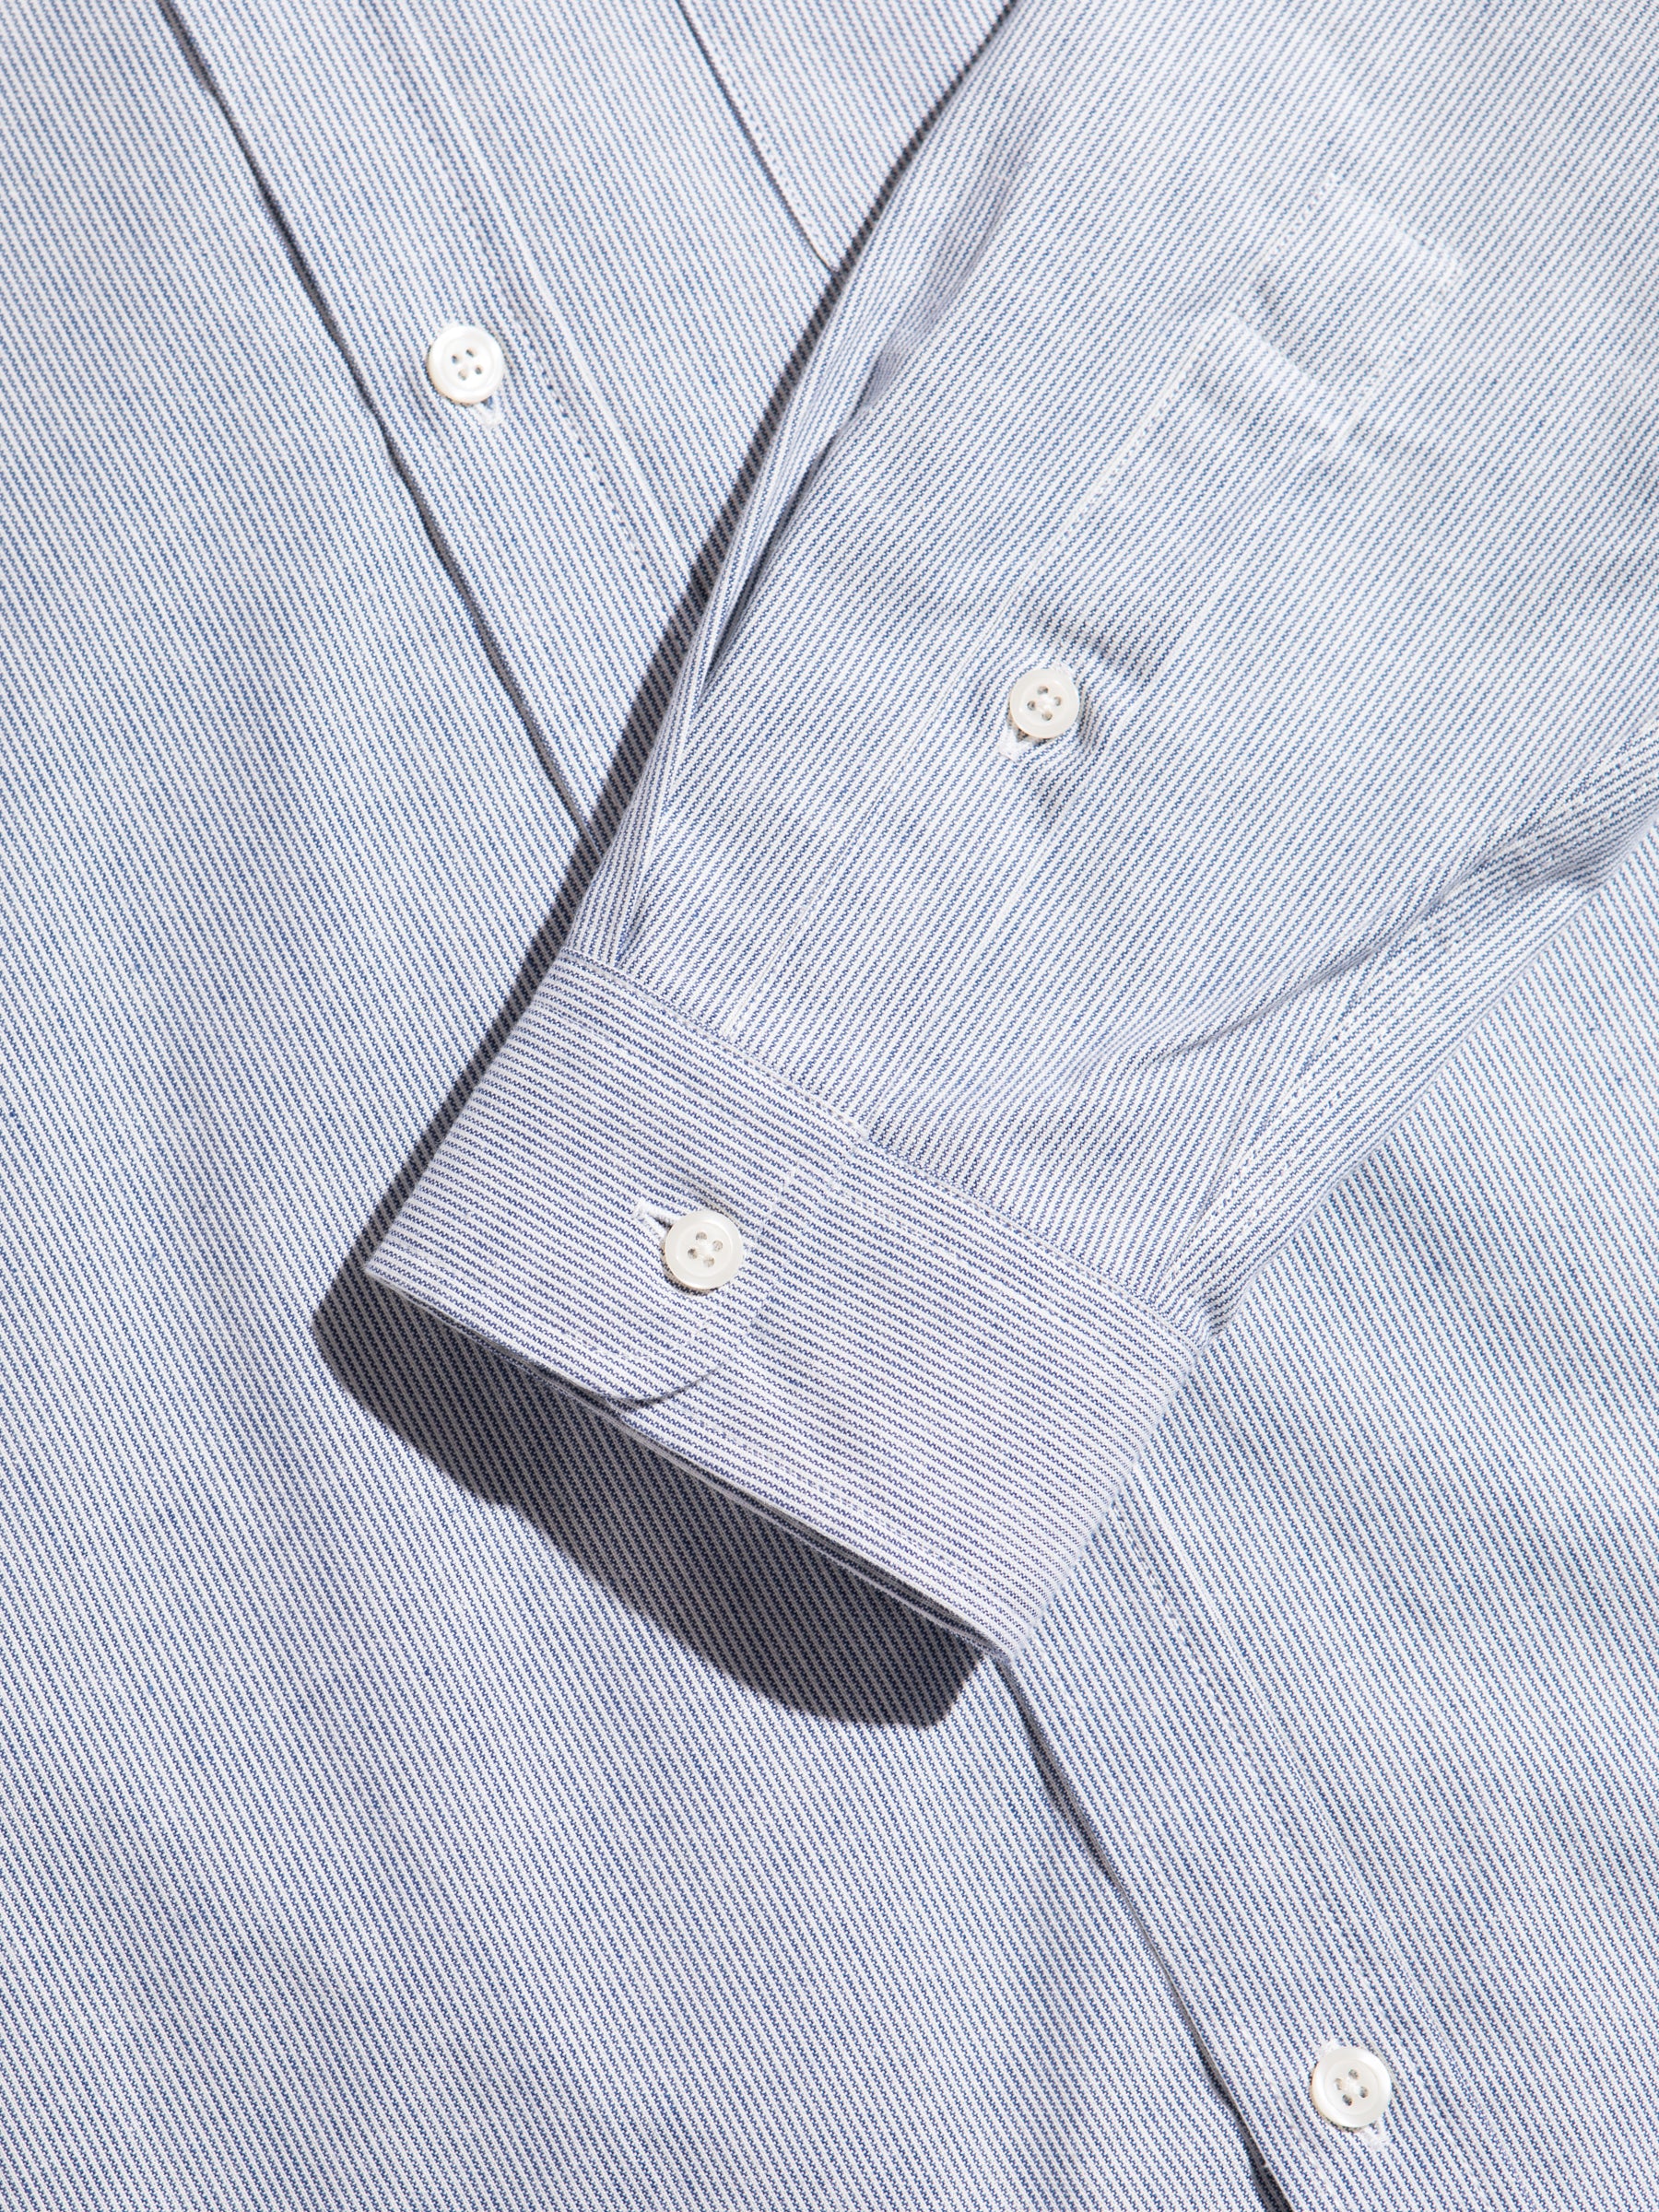 The buttoned front and cuff from the KESTIN Raeburn Shirt in Thin Blue Stripe